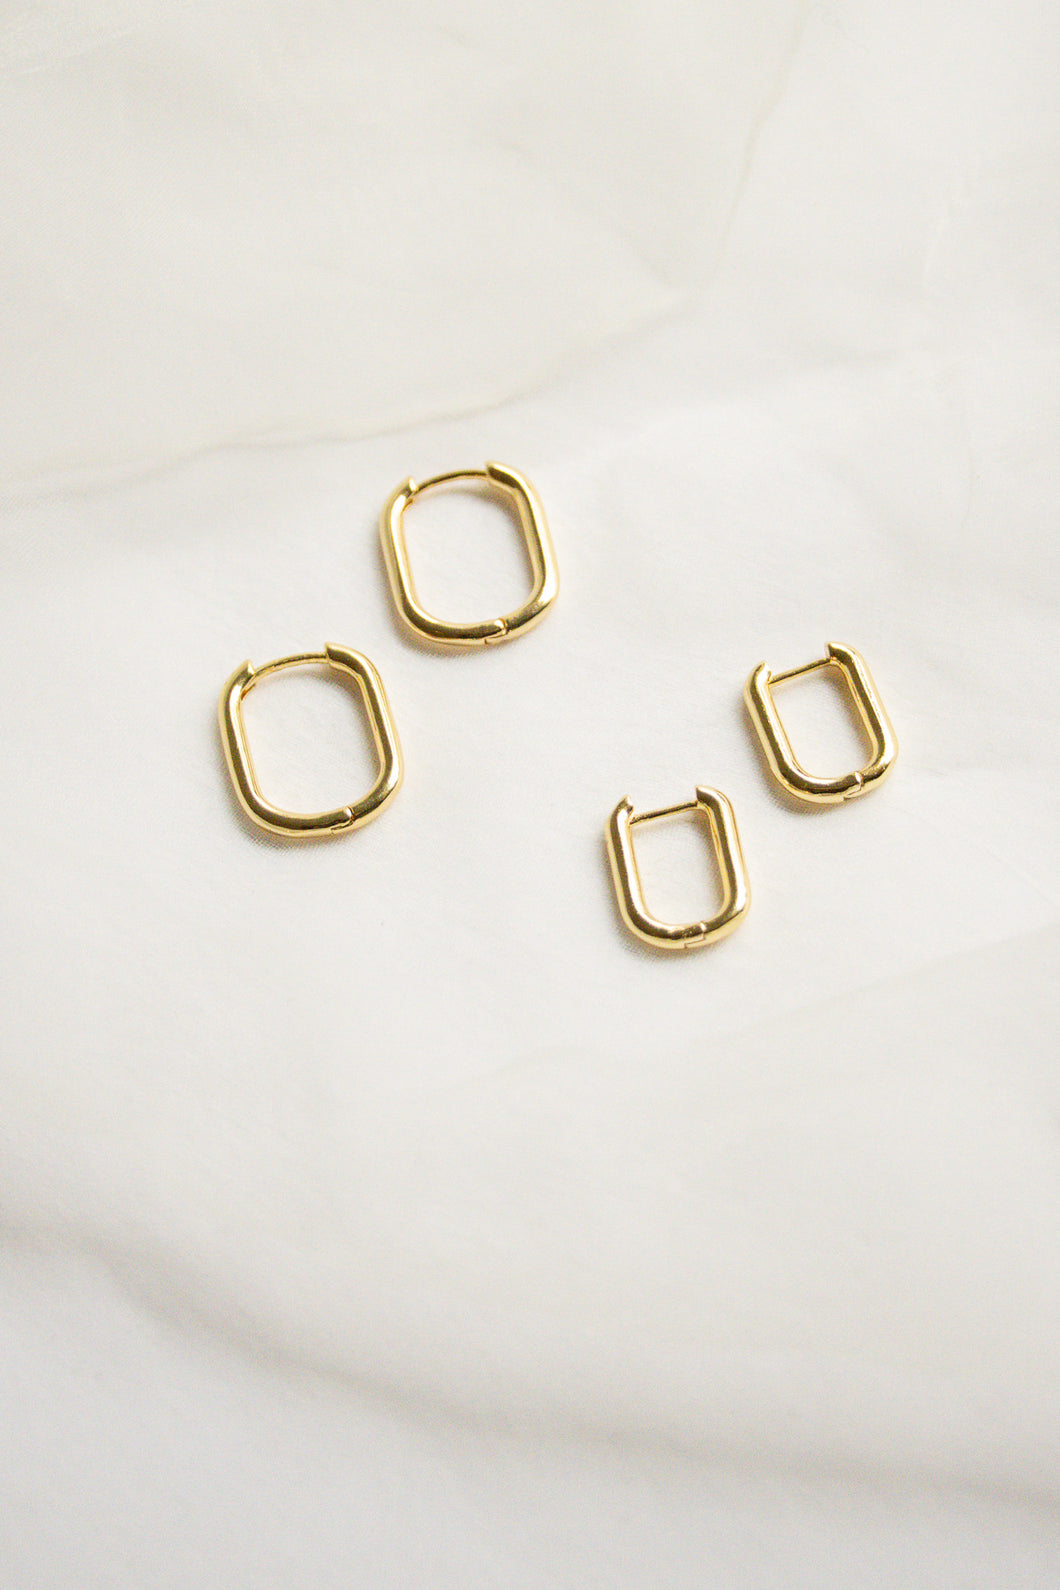 Gold Square Hoops in small and large